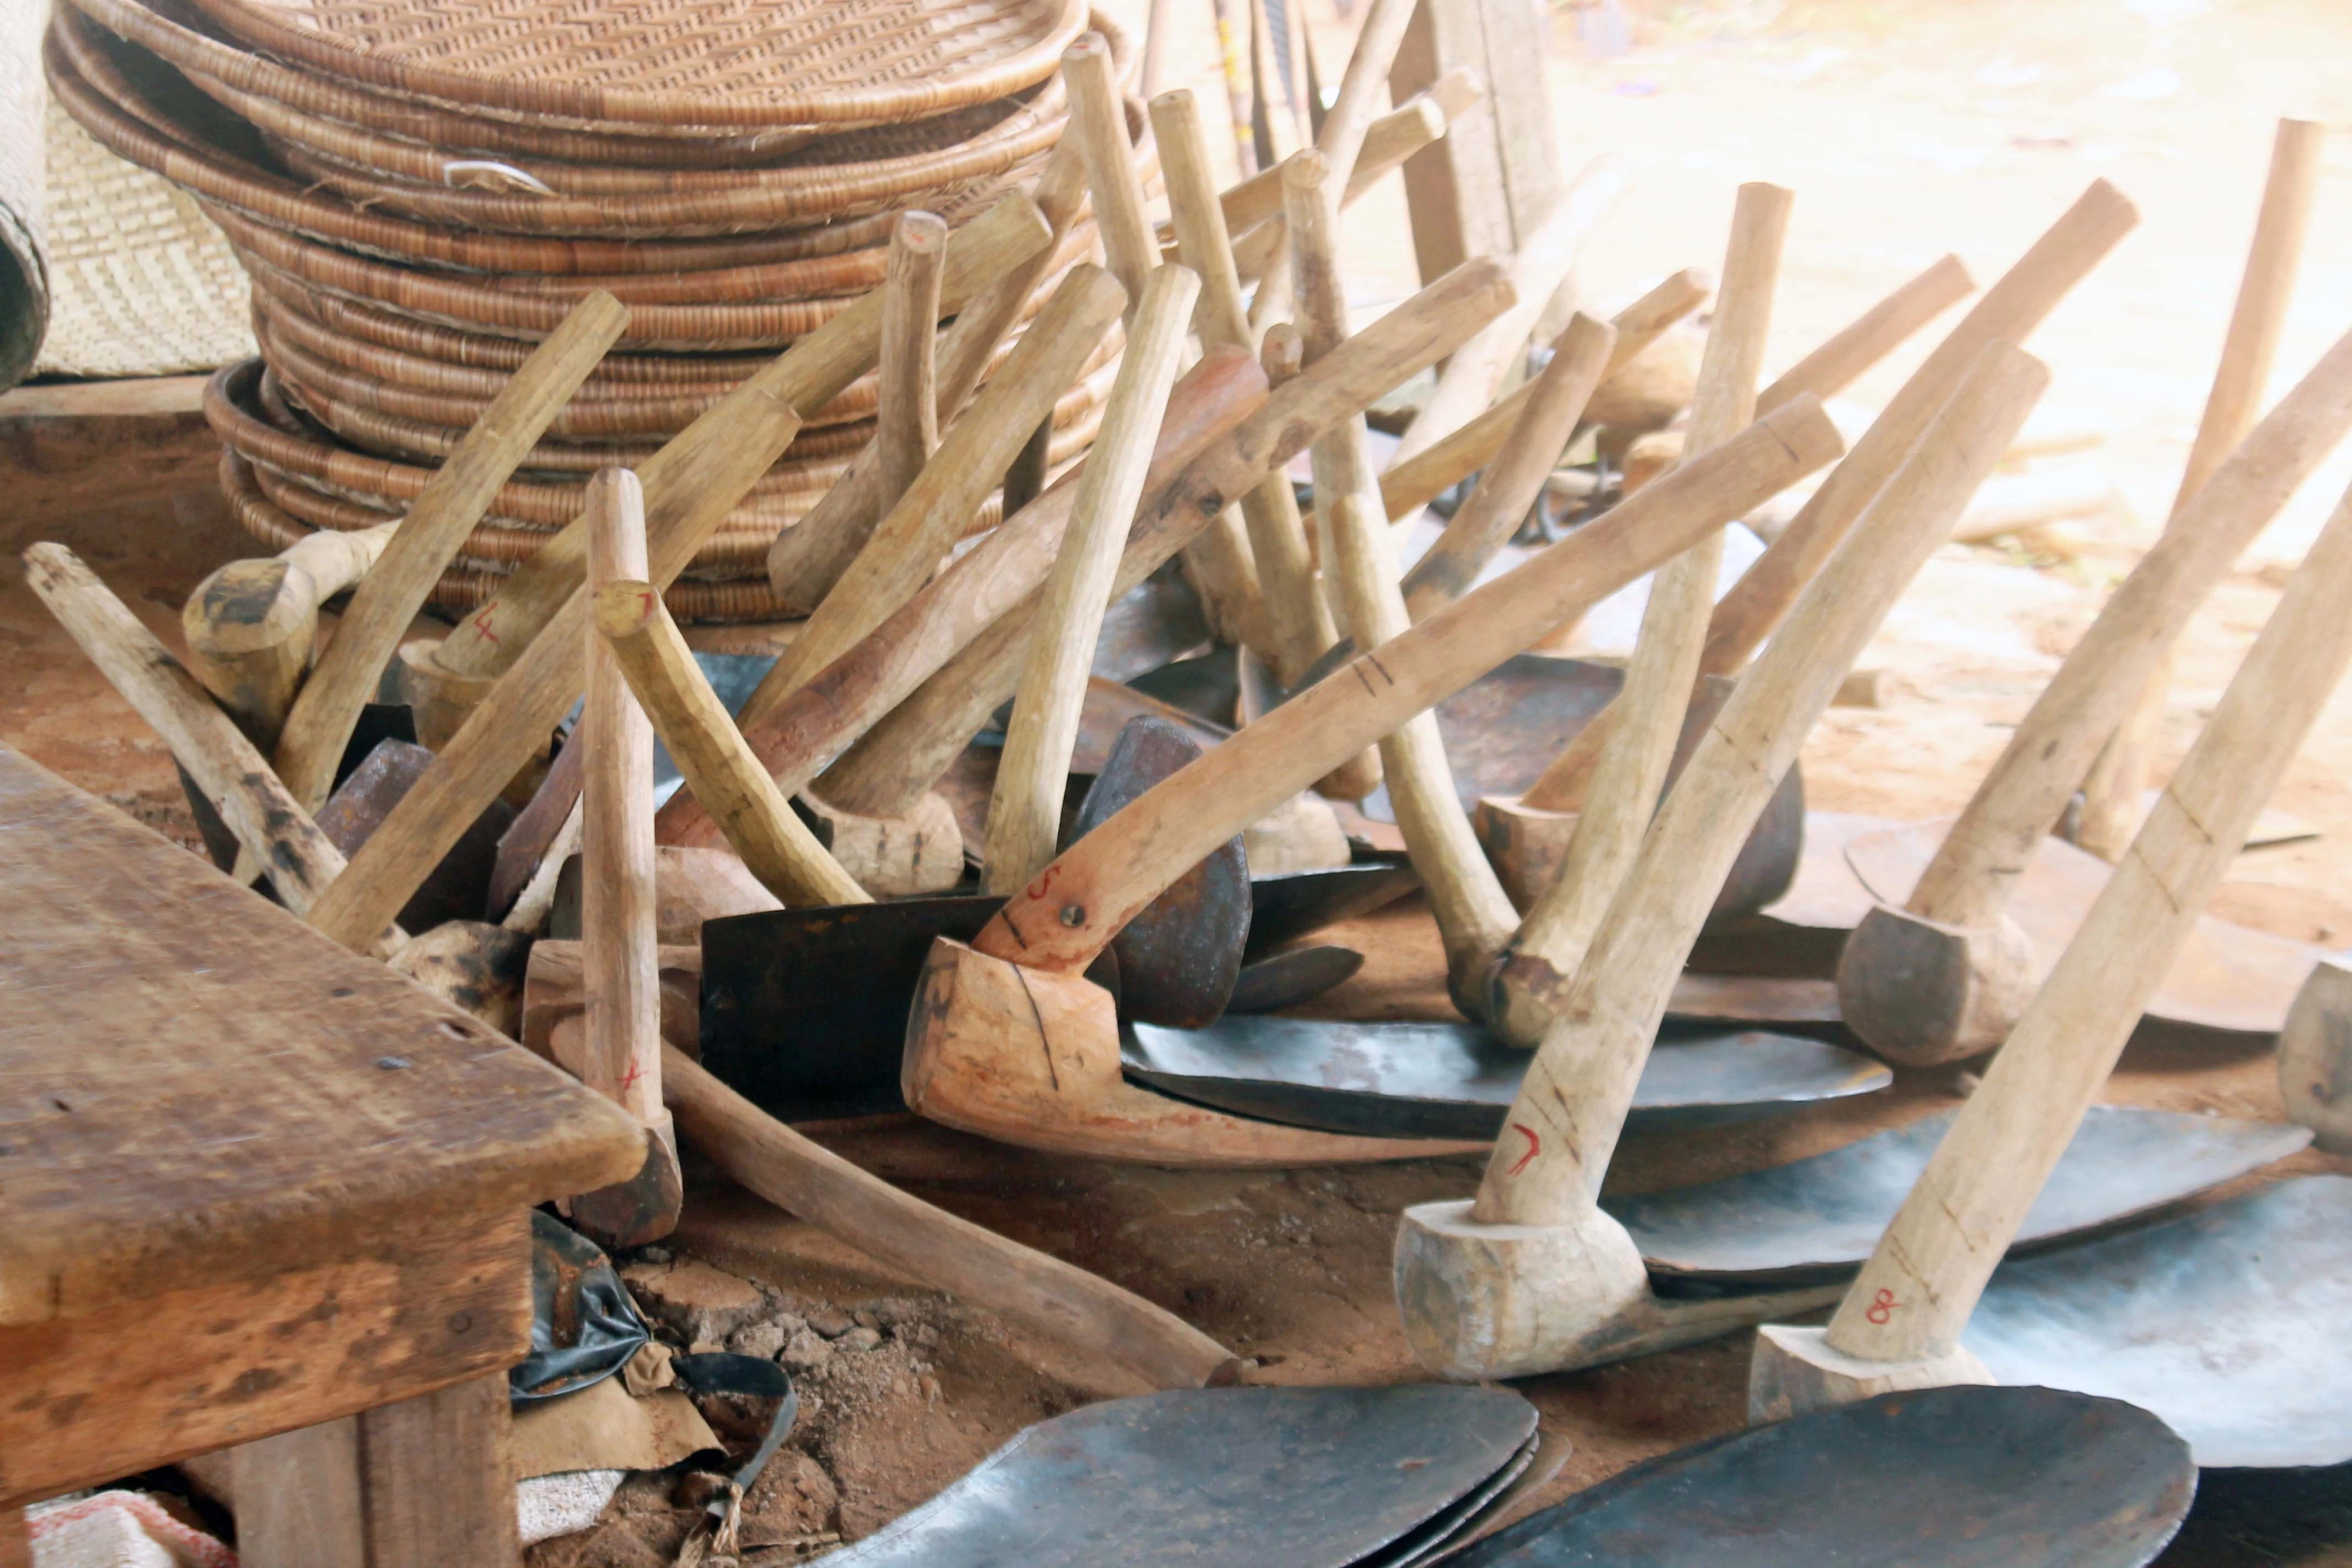 Top 18 Farm Tools In Nigeria And Their Uses